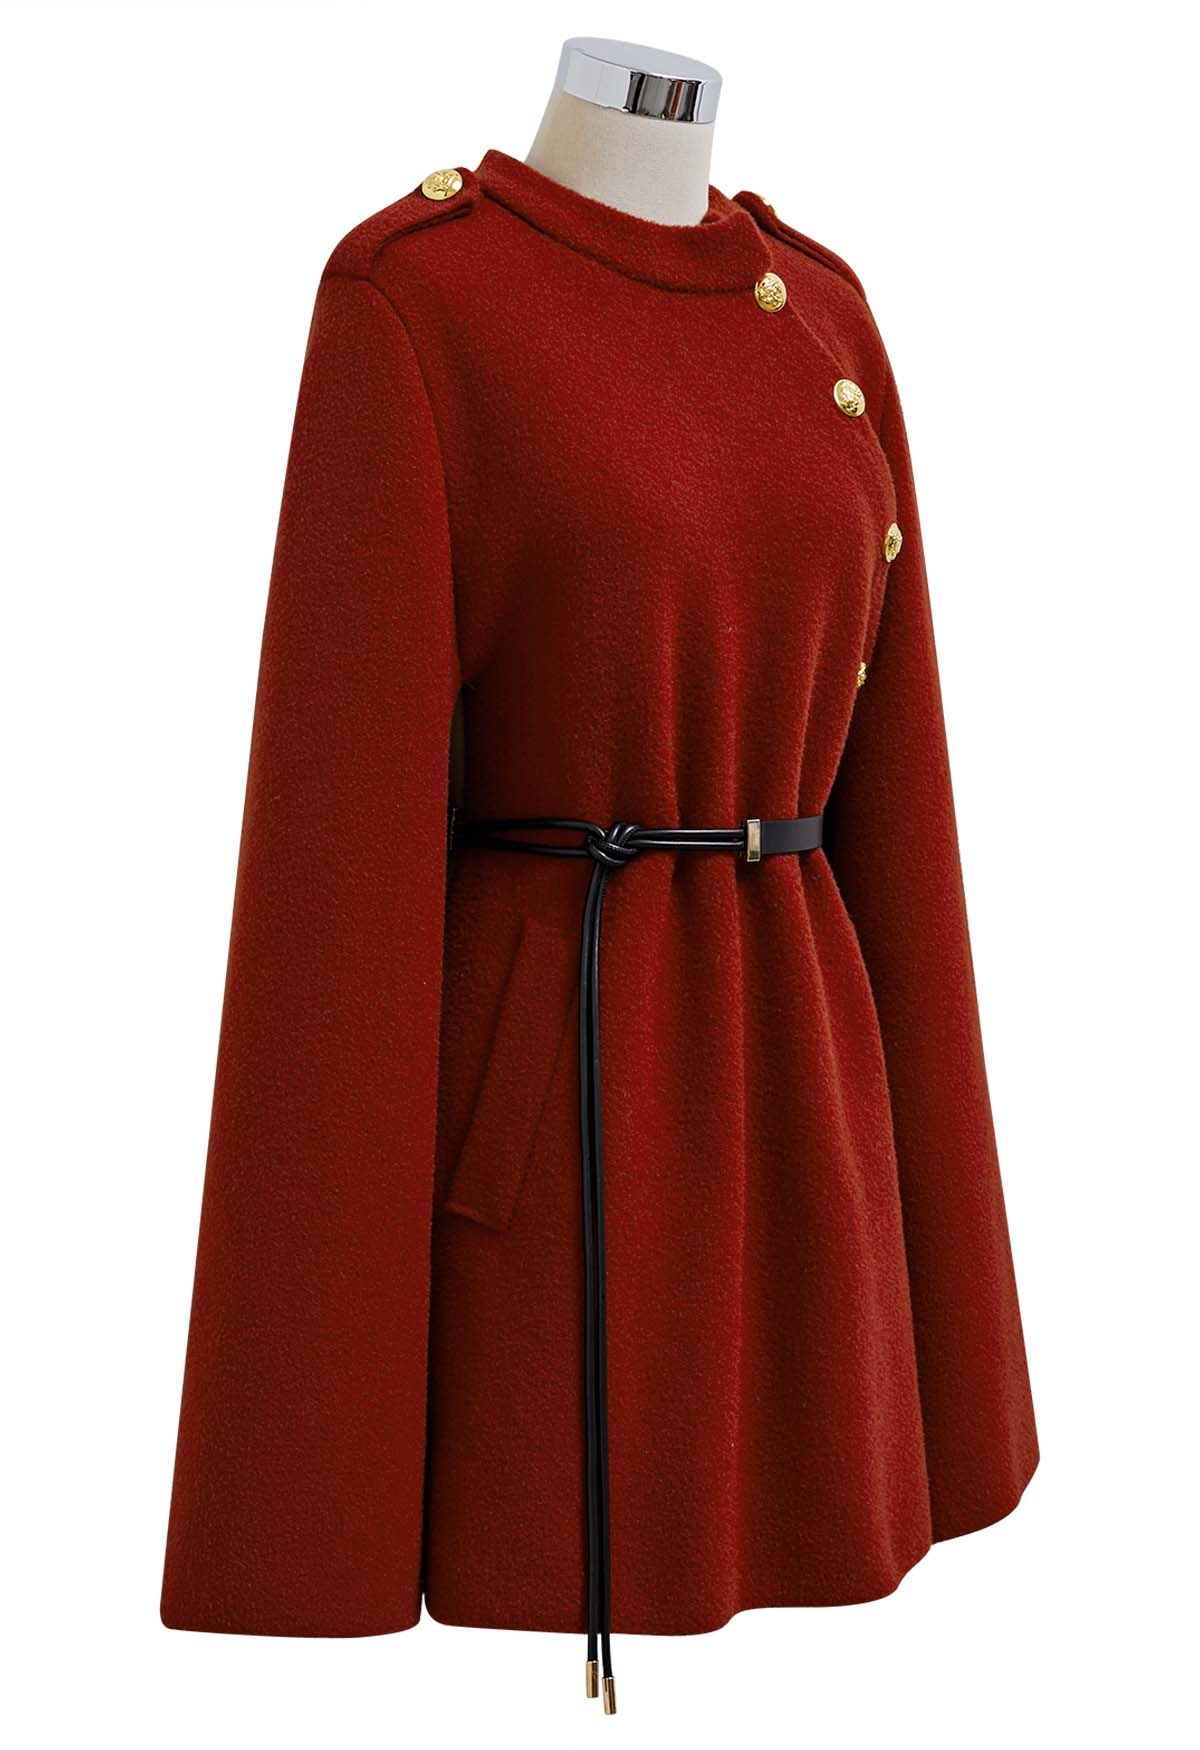 Golden Button Belted Cape Coat in Red - Retro, Indie and Unique Fashion